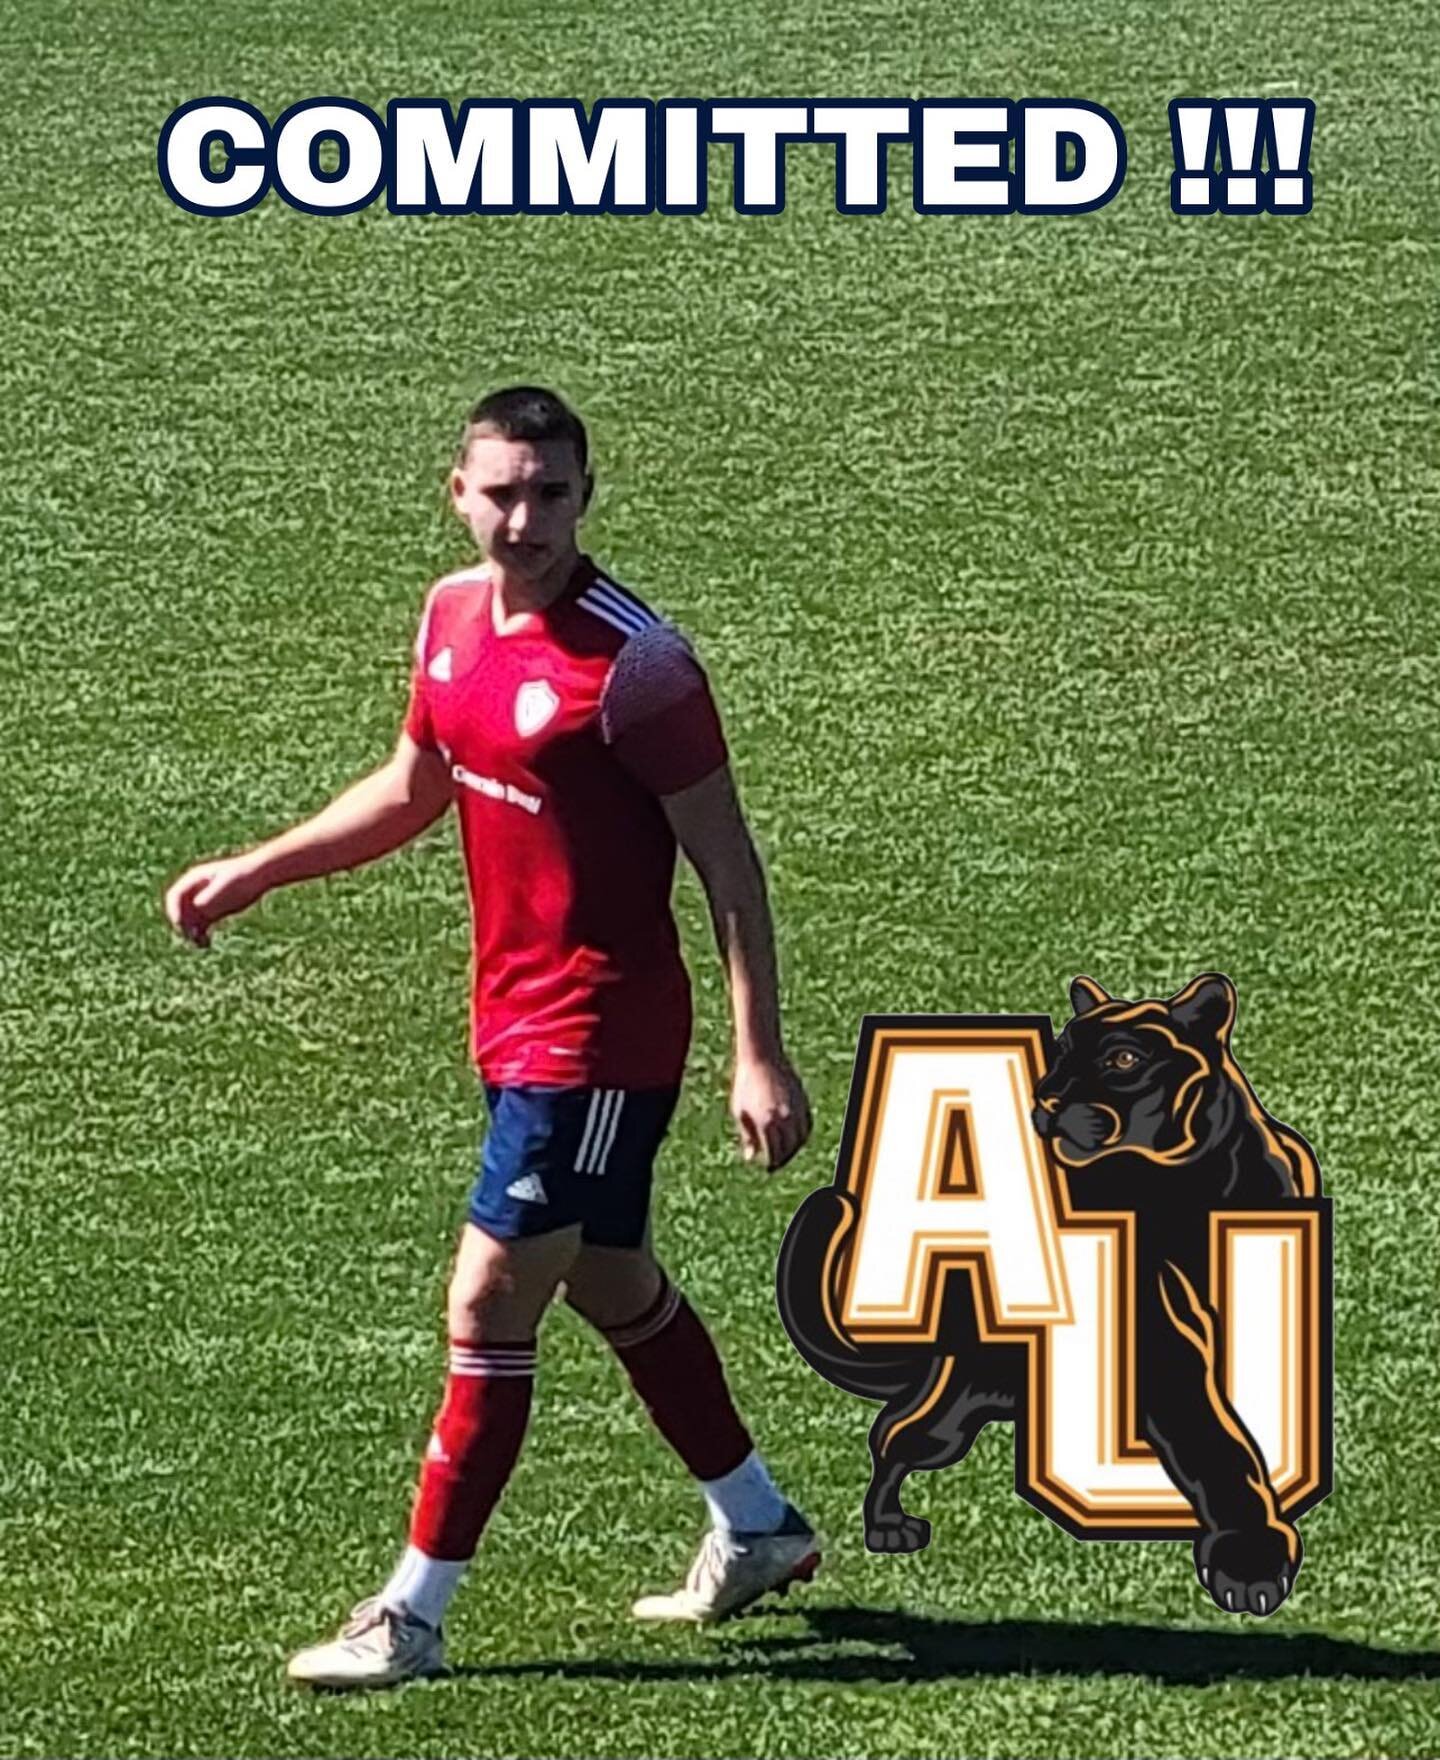 Congratulations to Tyler Dwyer who committed to Adelphi University 💪🏼⚽️🎓 #1inSWFL #FLWestFC #SuccessisaChoice #bmwofnaples #sportsrecruits #college #nextlevel